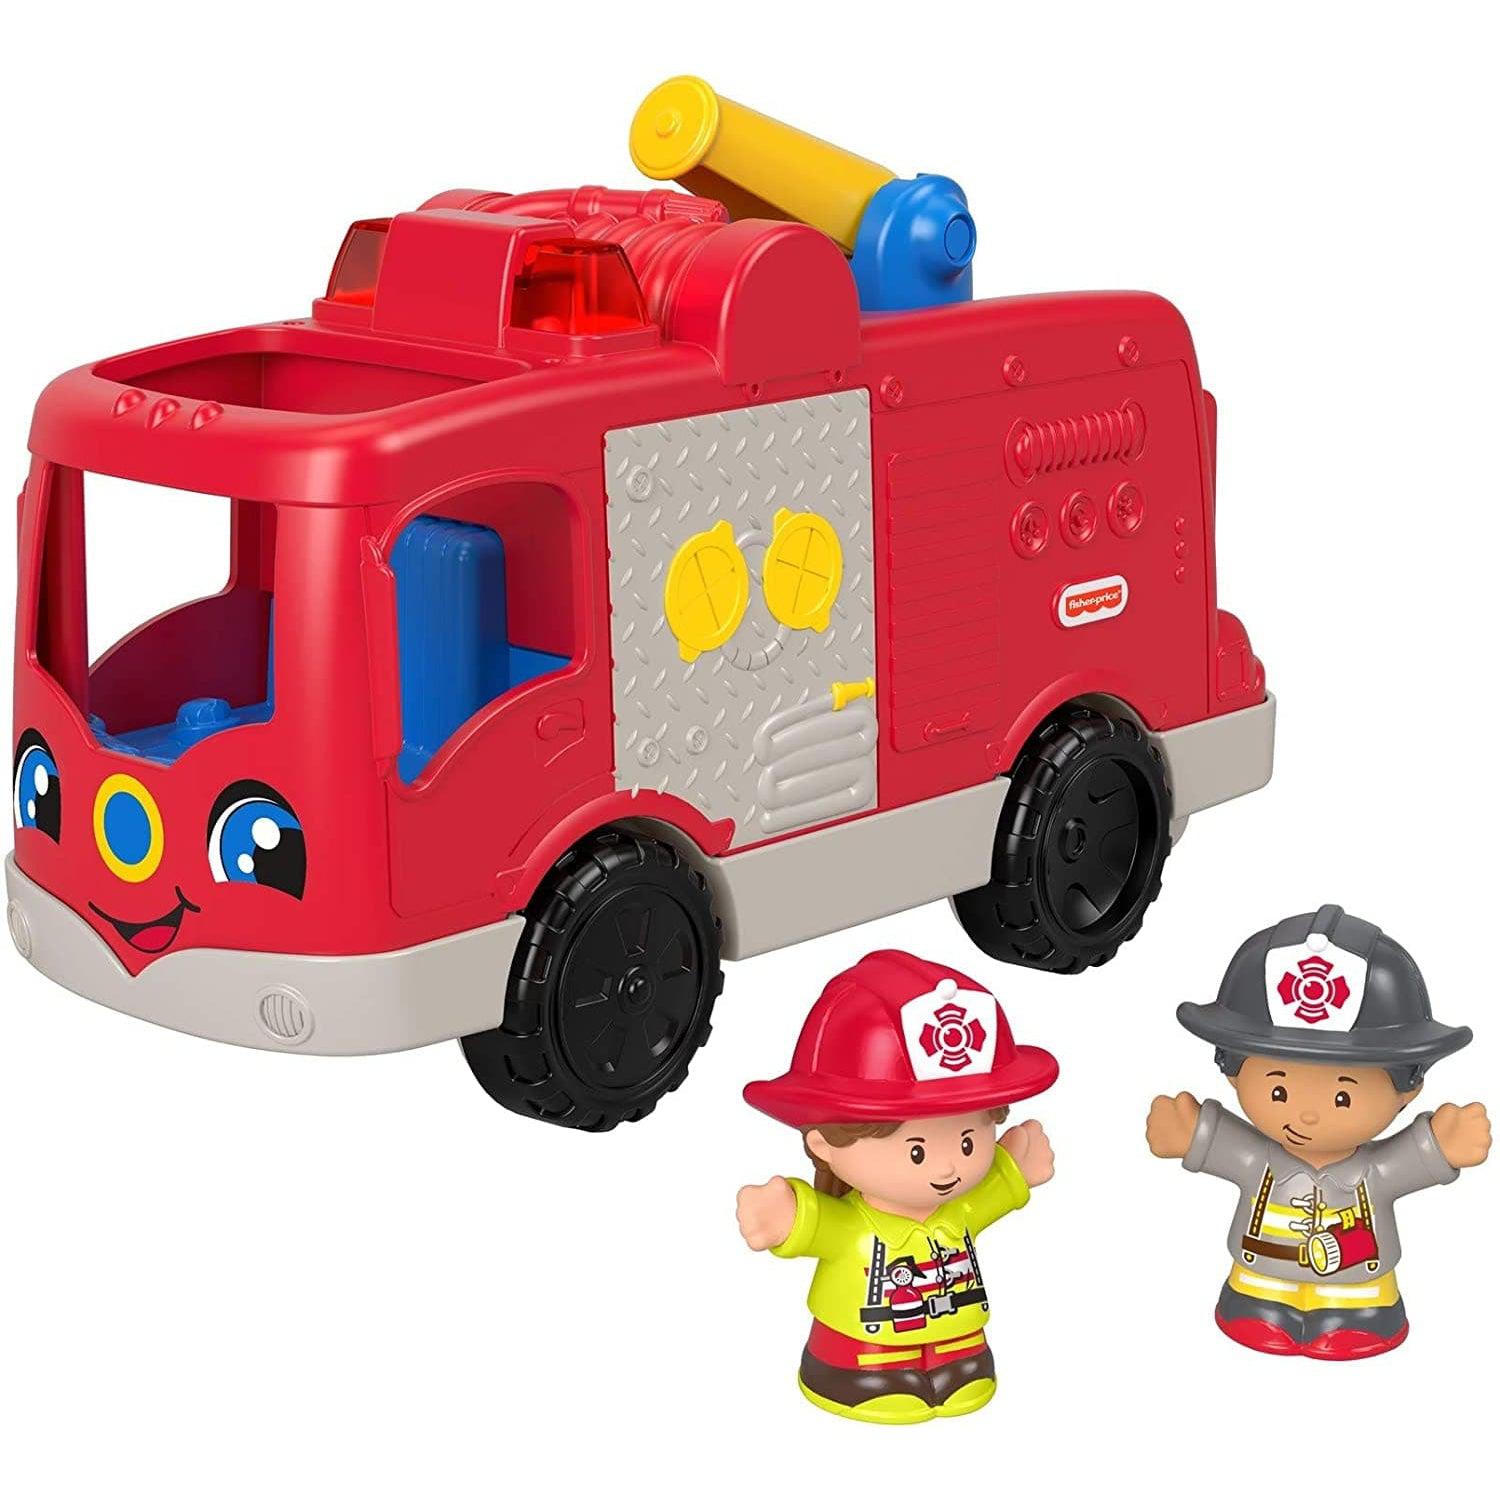 Fisher Price-Fisher-Price Little People Large Vehicle -FMN98-Firetruck-Legacy Toys